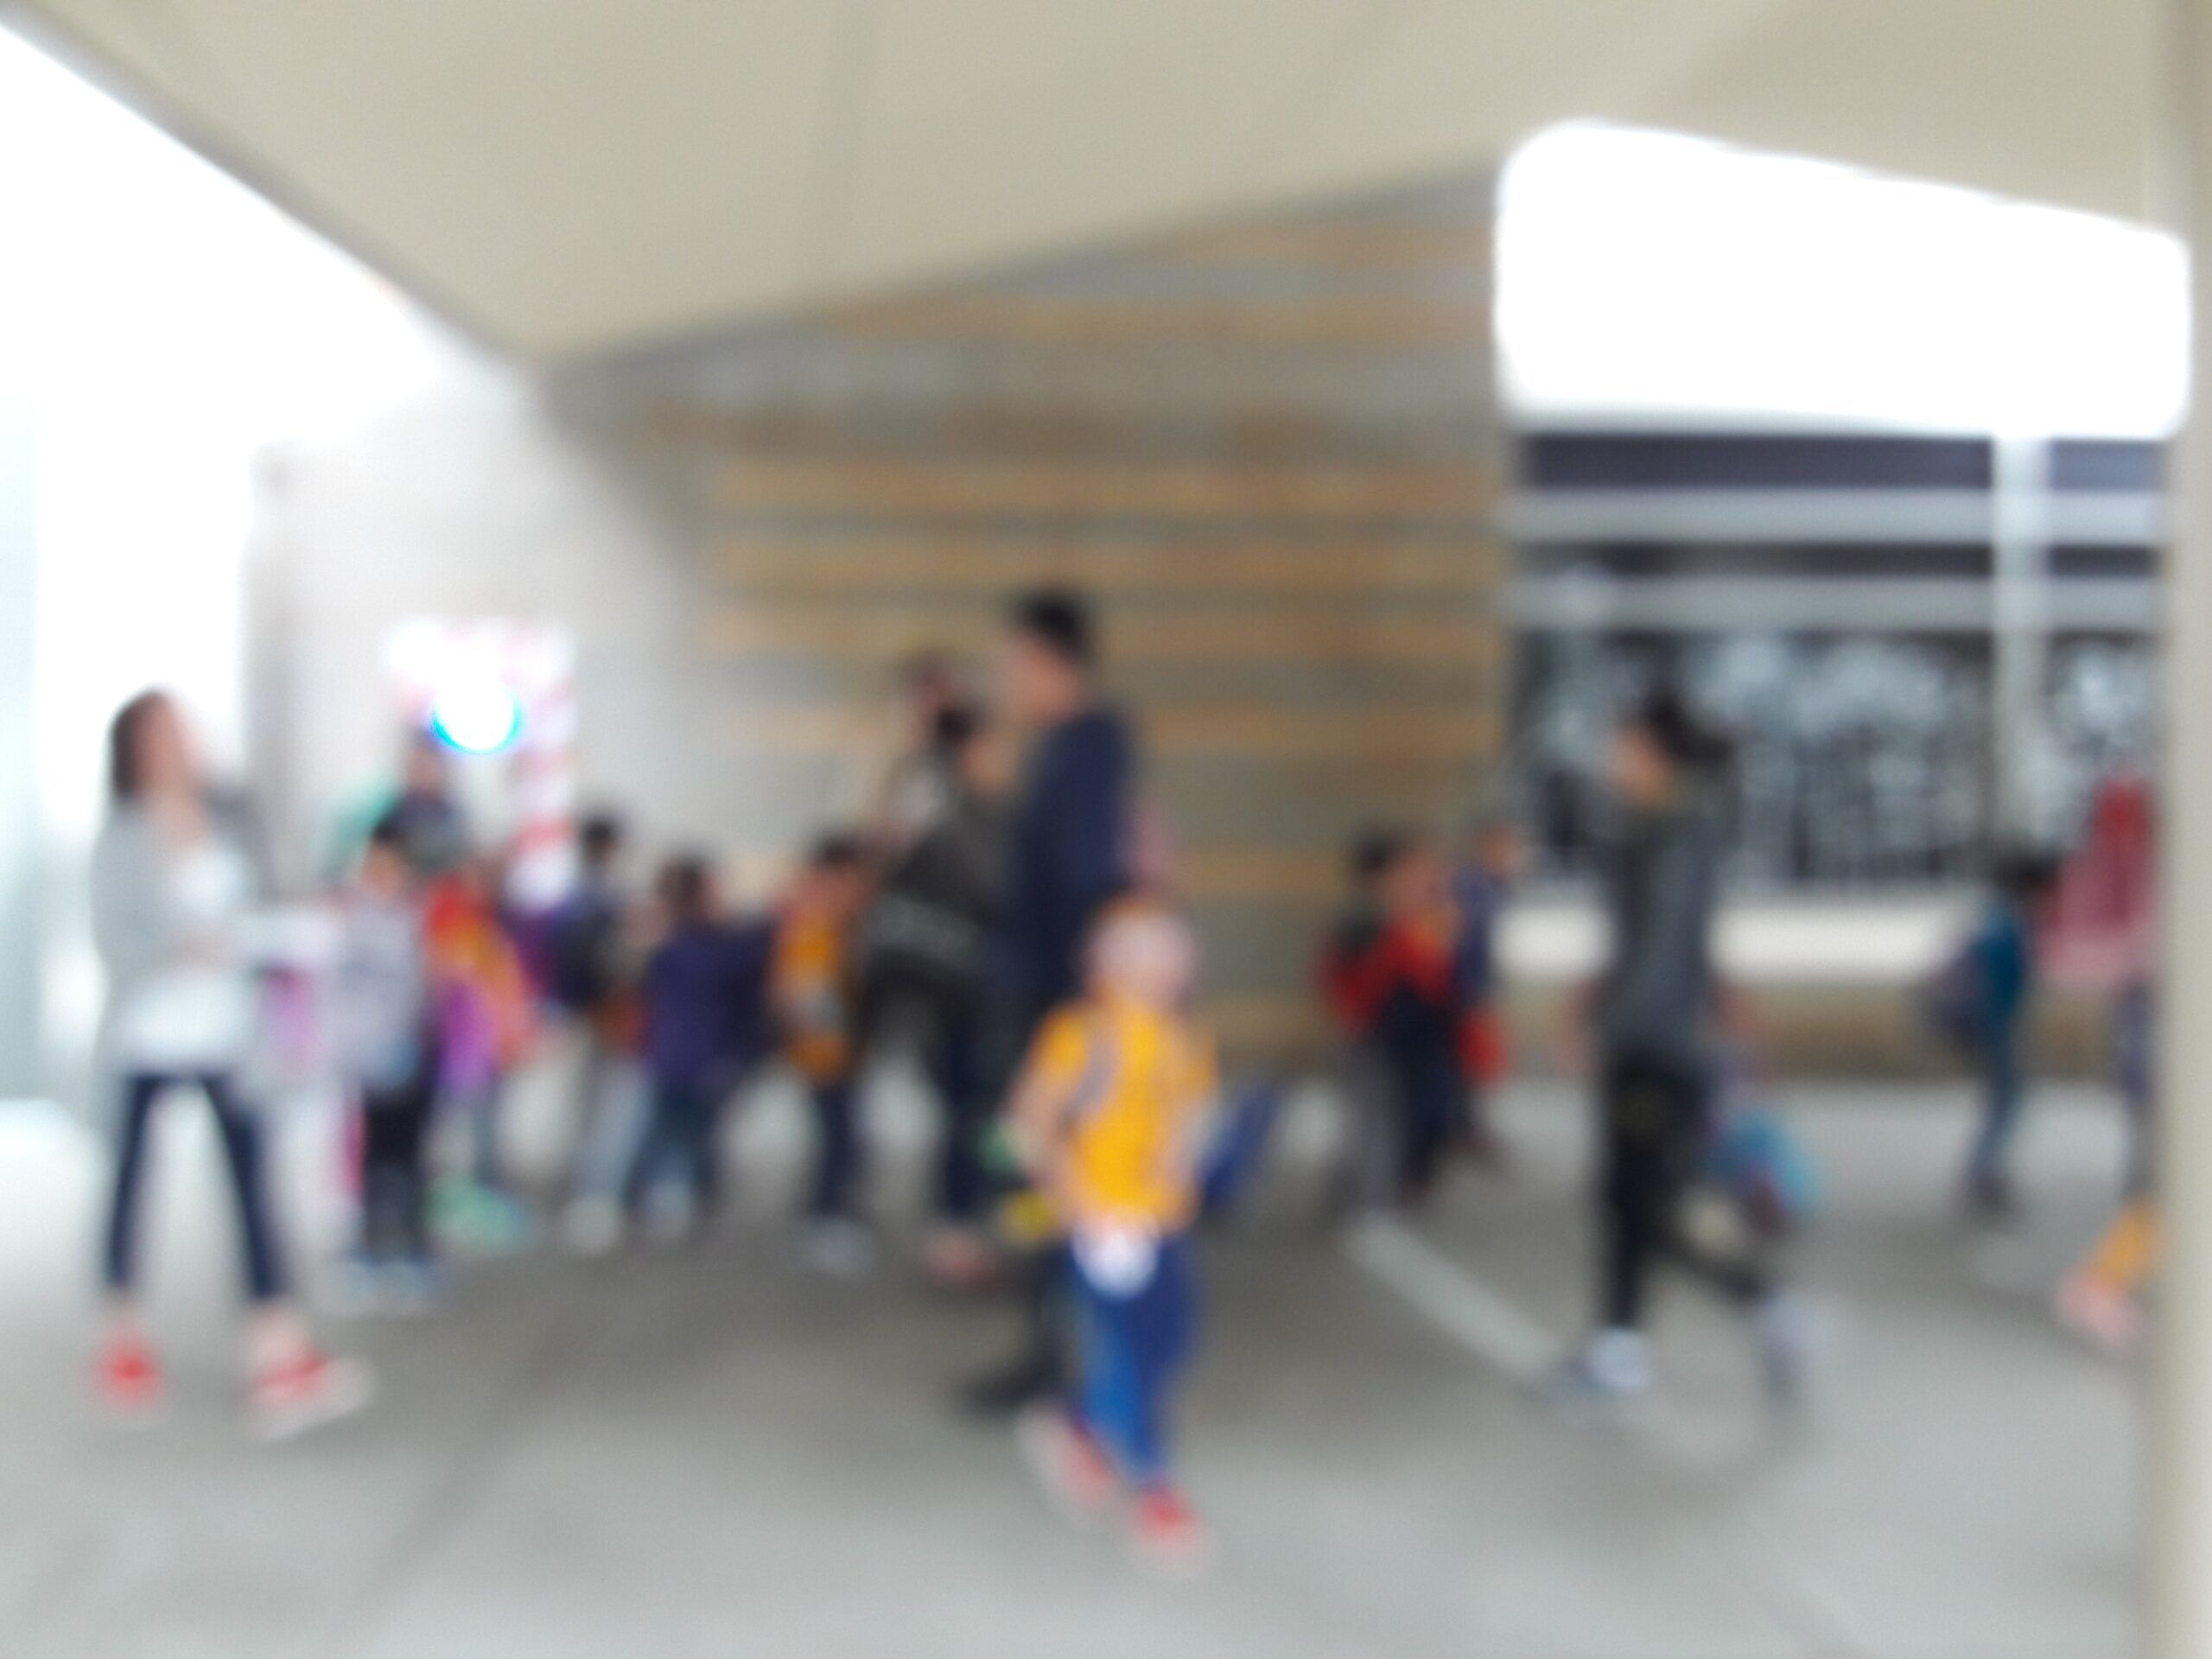 Blur, elementary school children on a technology field trip, teachers, walking, waiting, talking, Building 92, Microsoft Campus, Redmond, Washington, USA

Each time I tried to focus these and related shots at the time, the camera went out of focus. Then I realized - of course, the people in this shot should be out of focus because it's not about them, it's every child who goes on a field trip. After that, the camera maintained focus for other photos this day and location.

drop a penny if you wish https://paypal.me/1drlane
wonderlane@gmail.com